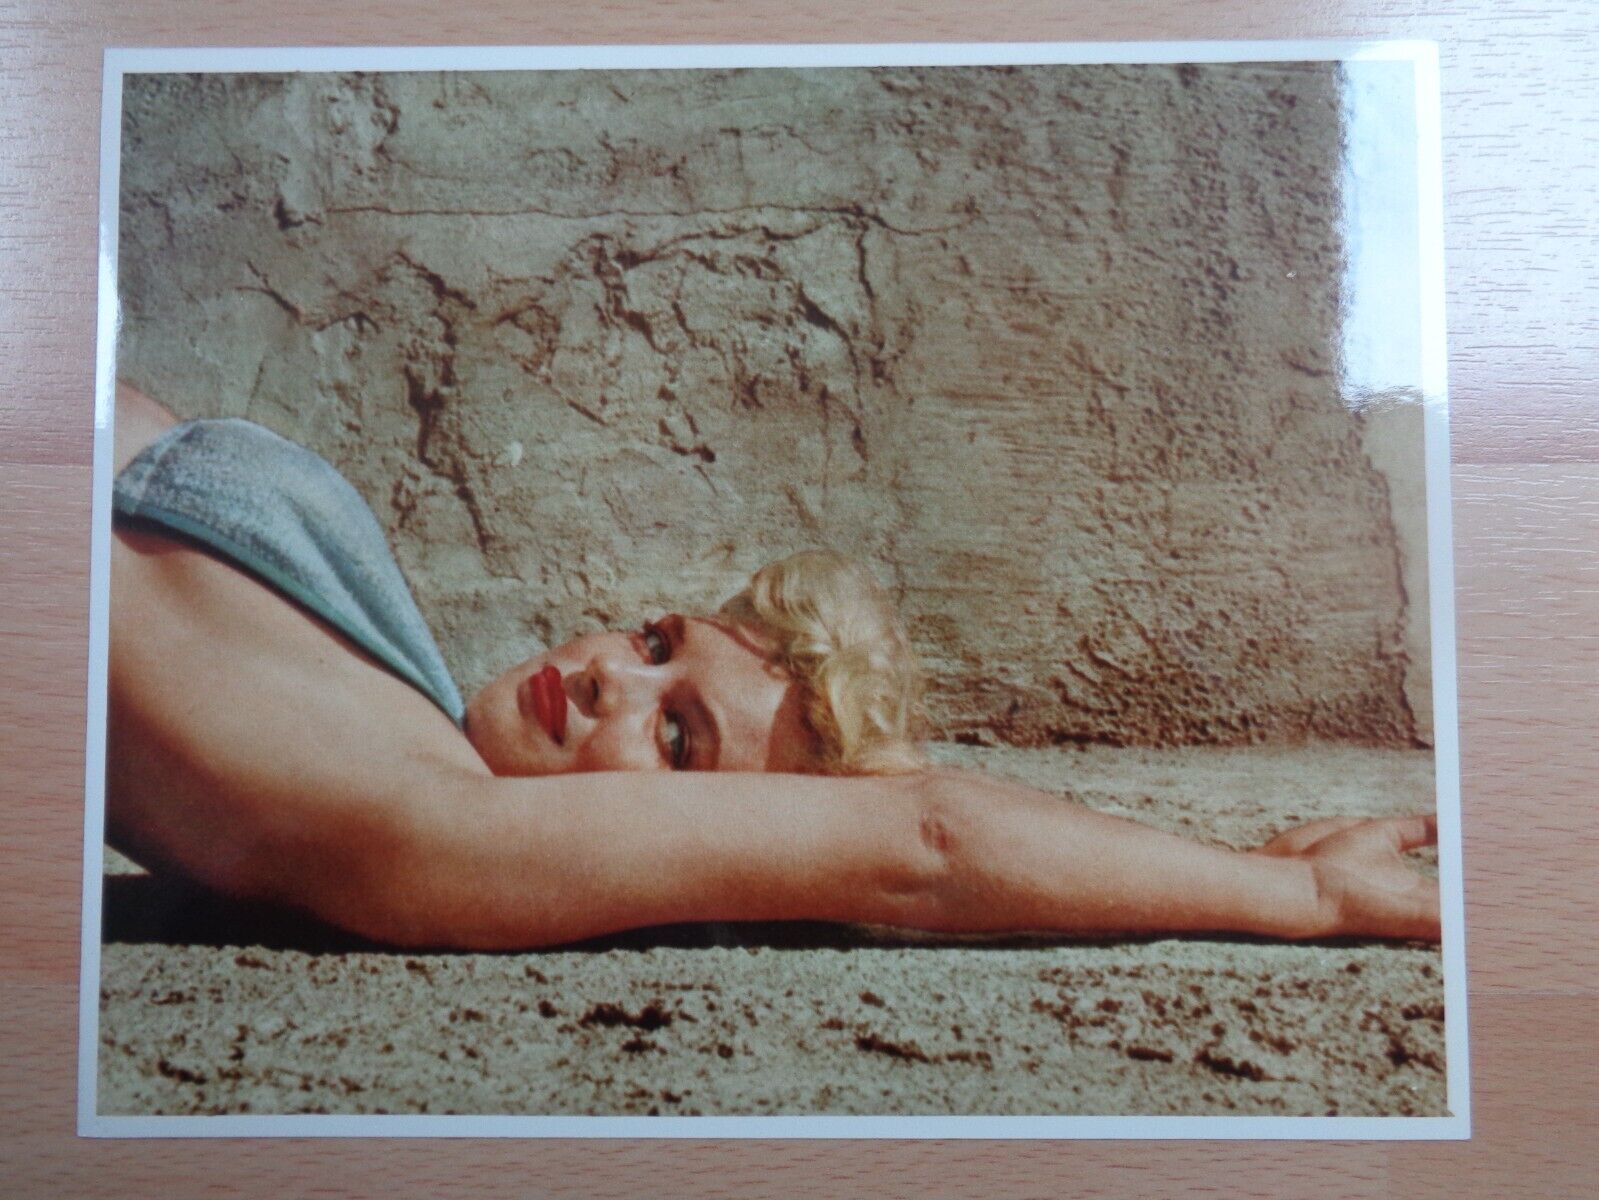 1951 VINTAGE MARILYN MONROE PHOTO BY ANTHONY BEAUCHAMP 8X10 IN / 25.3CMX20.3CM